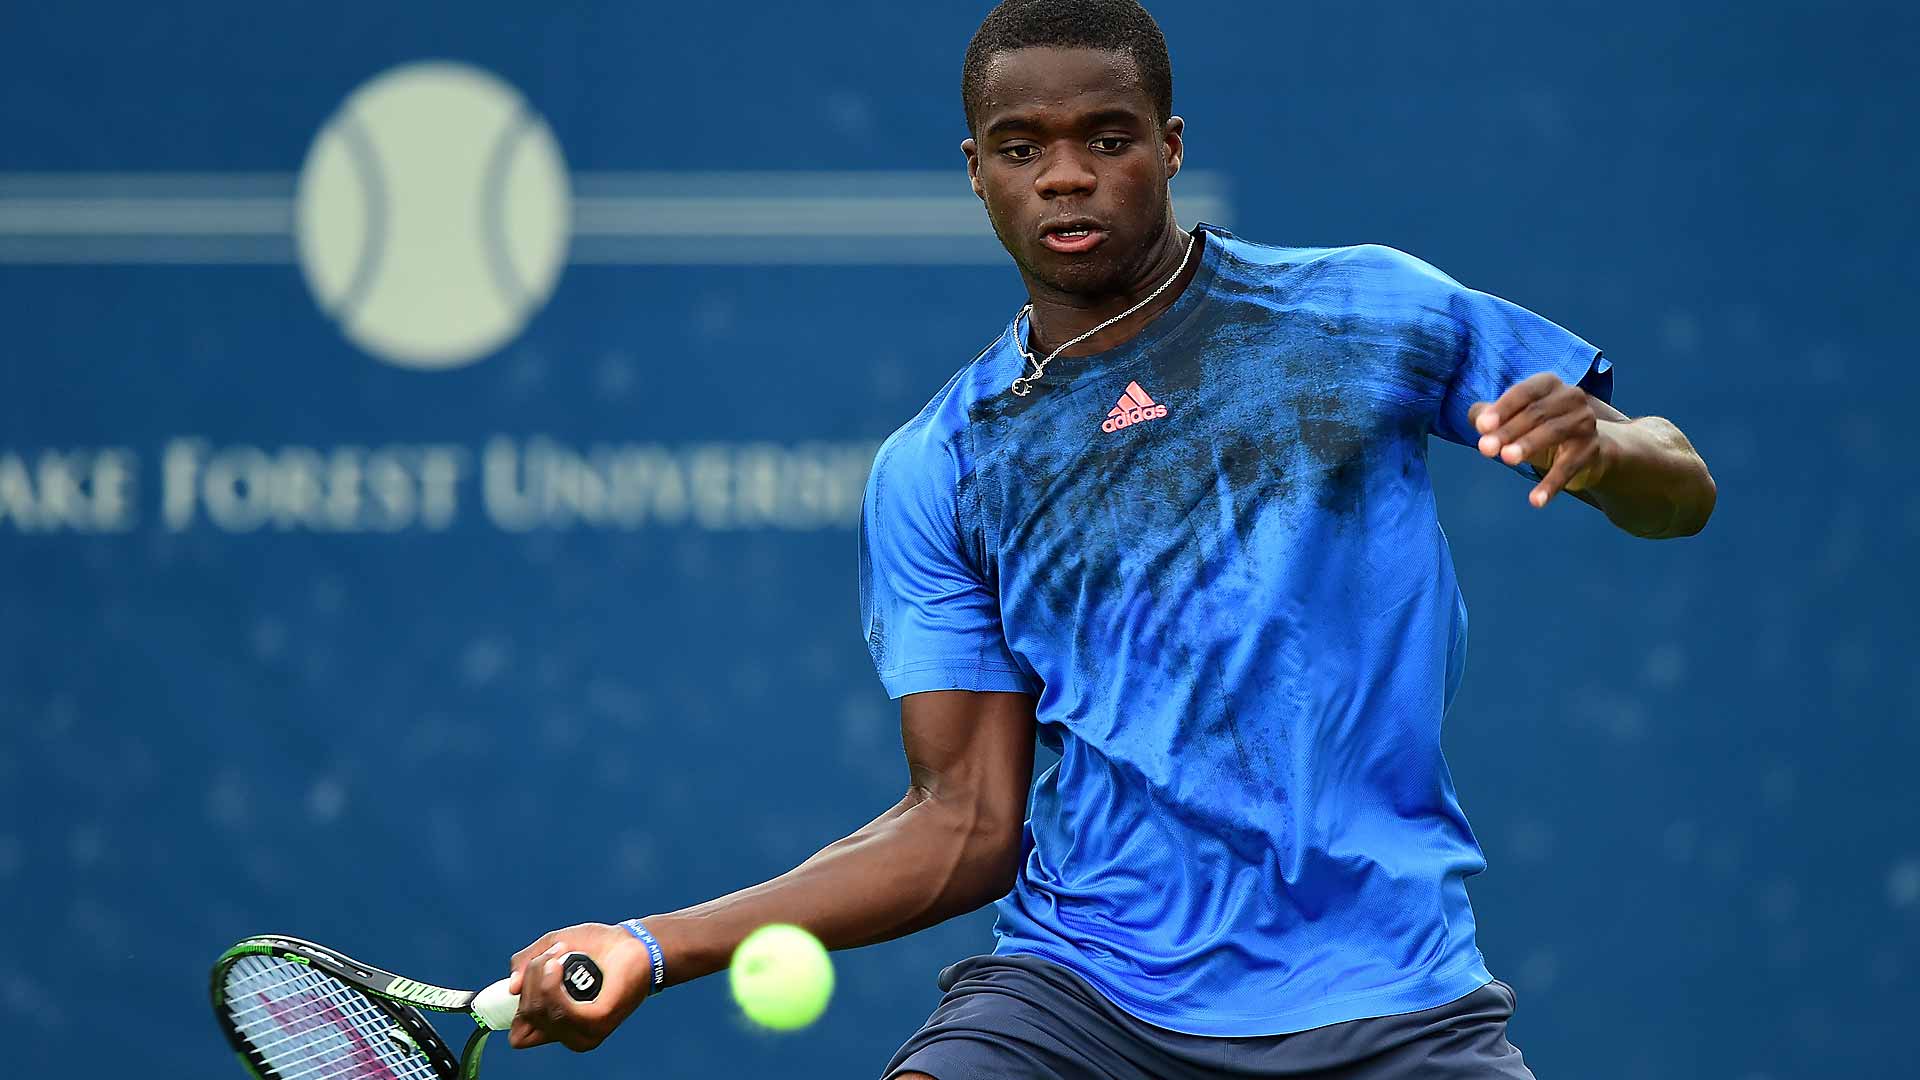 Tiafoe One To Watch In French Open TheHub.news